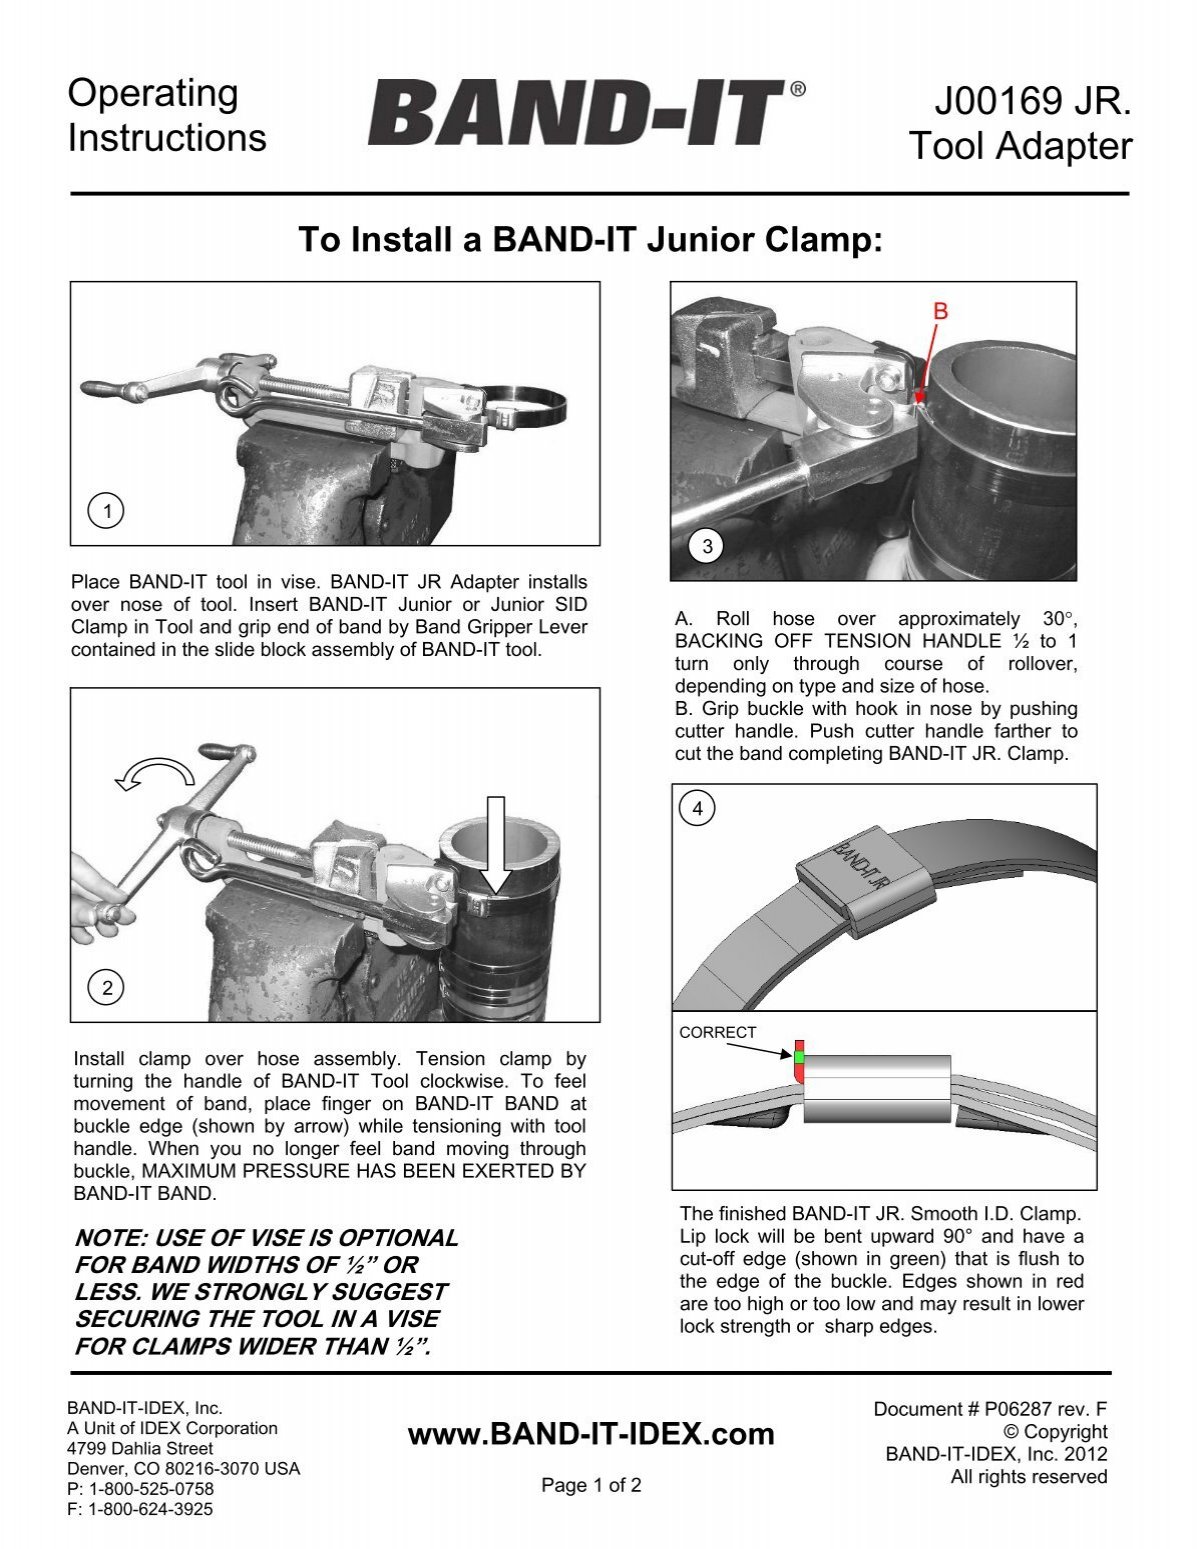 To Install a BAND-IT Junior Clamp